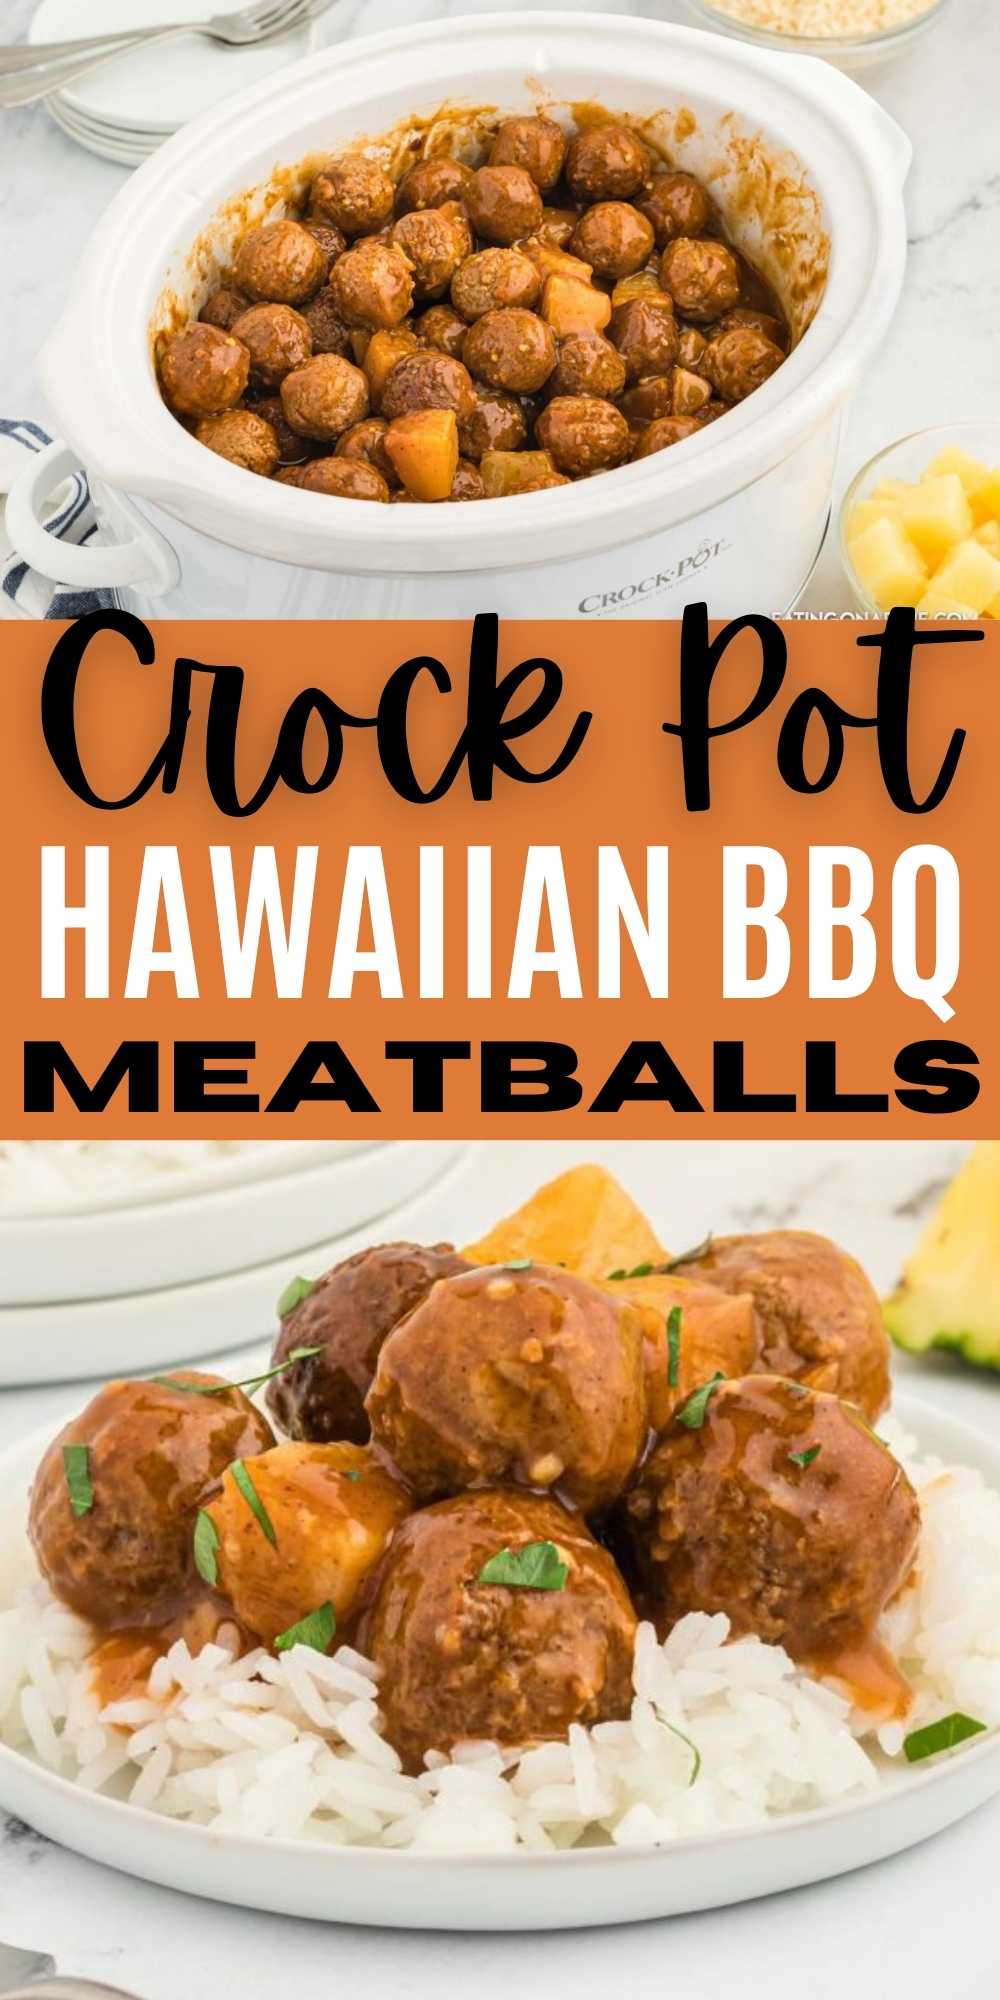 Try Crock Pot Hawaiian BBQ Meatballs. With just a few ingredients, it's easy to make tangy Hawaiian meatballs. Delicious meatballs to serve over rice or with roasted vegetables. #eatingonadime #hawaiianbbqmeatballs #slowcookerrecipe